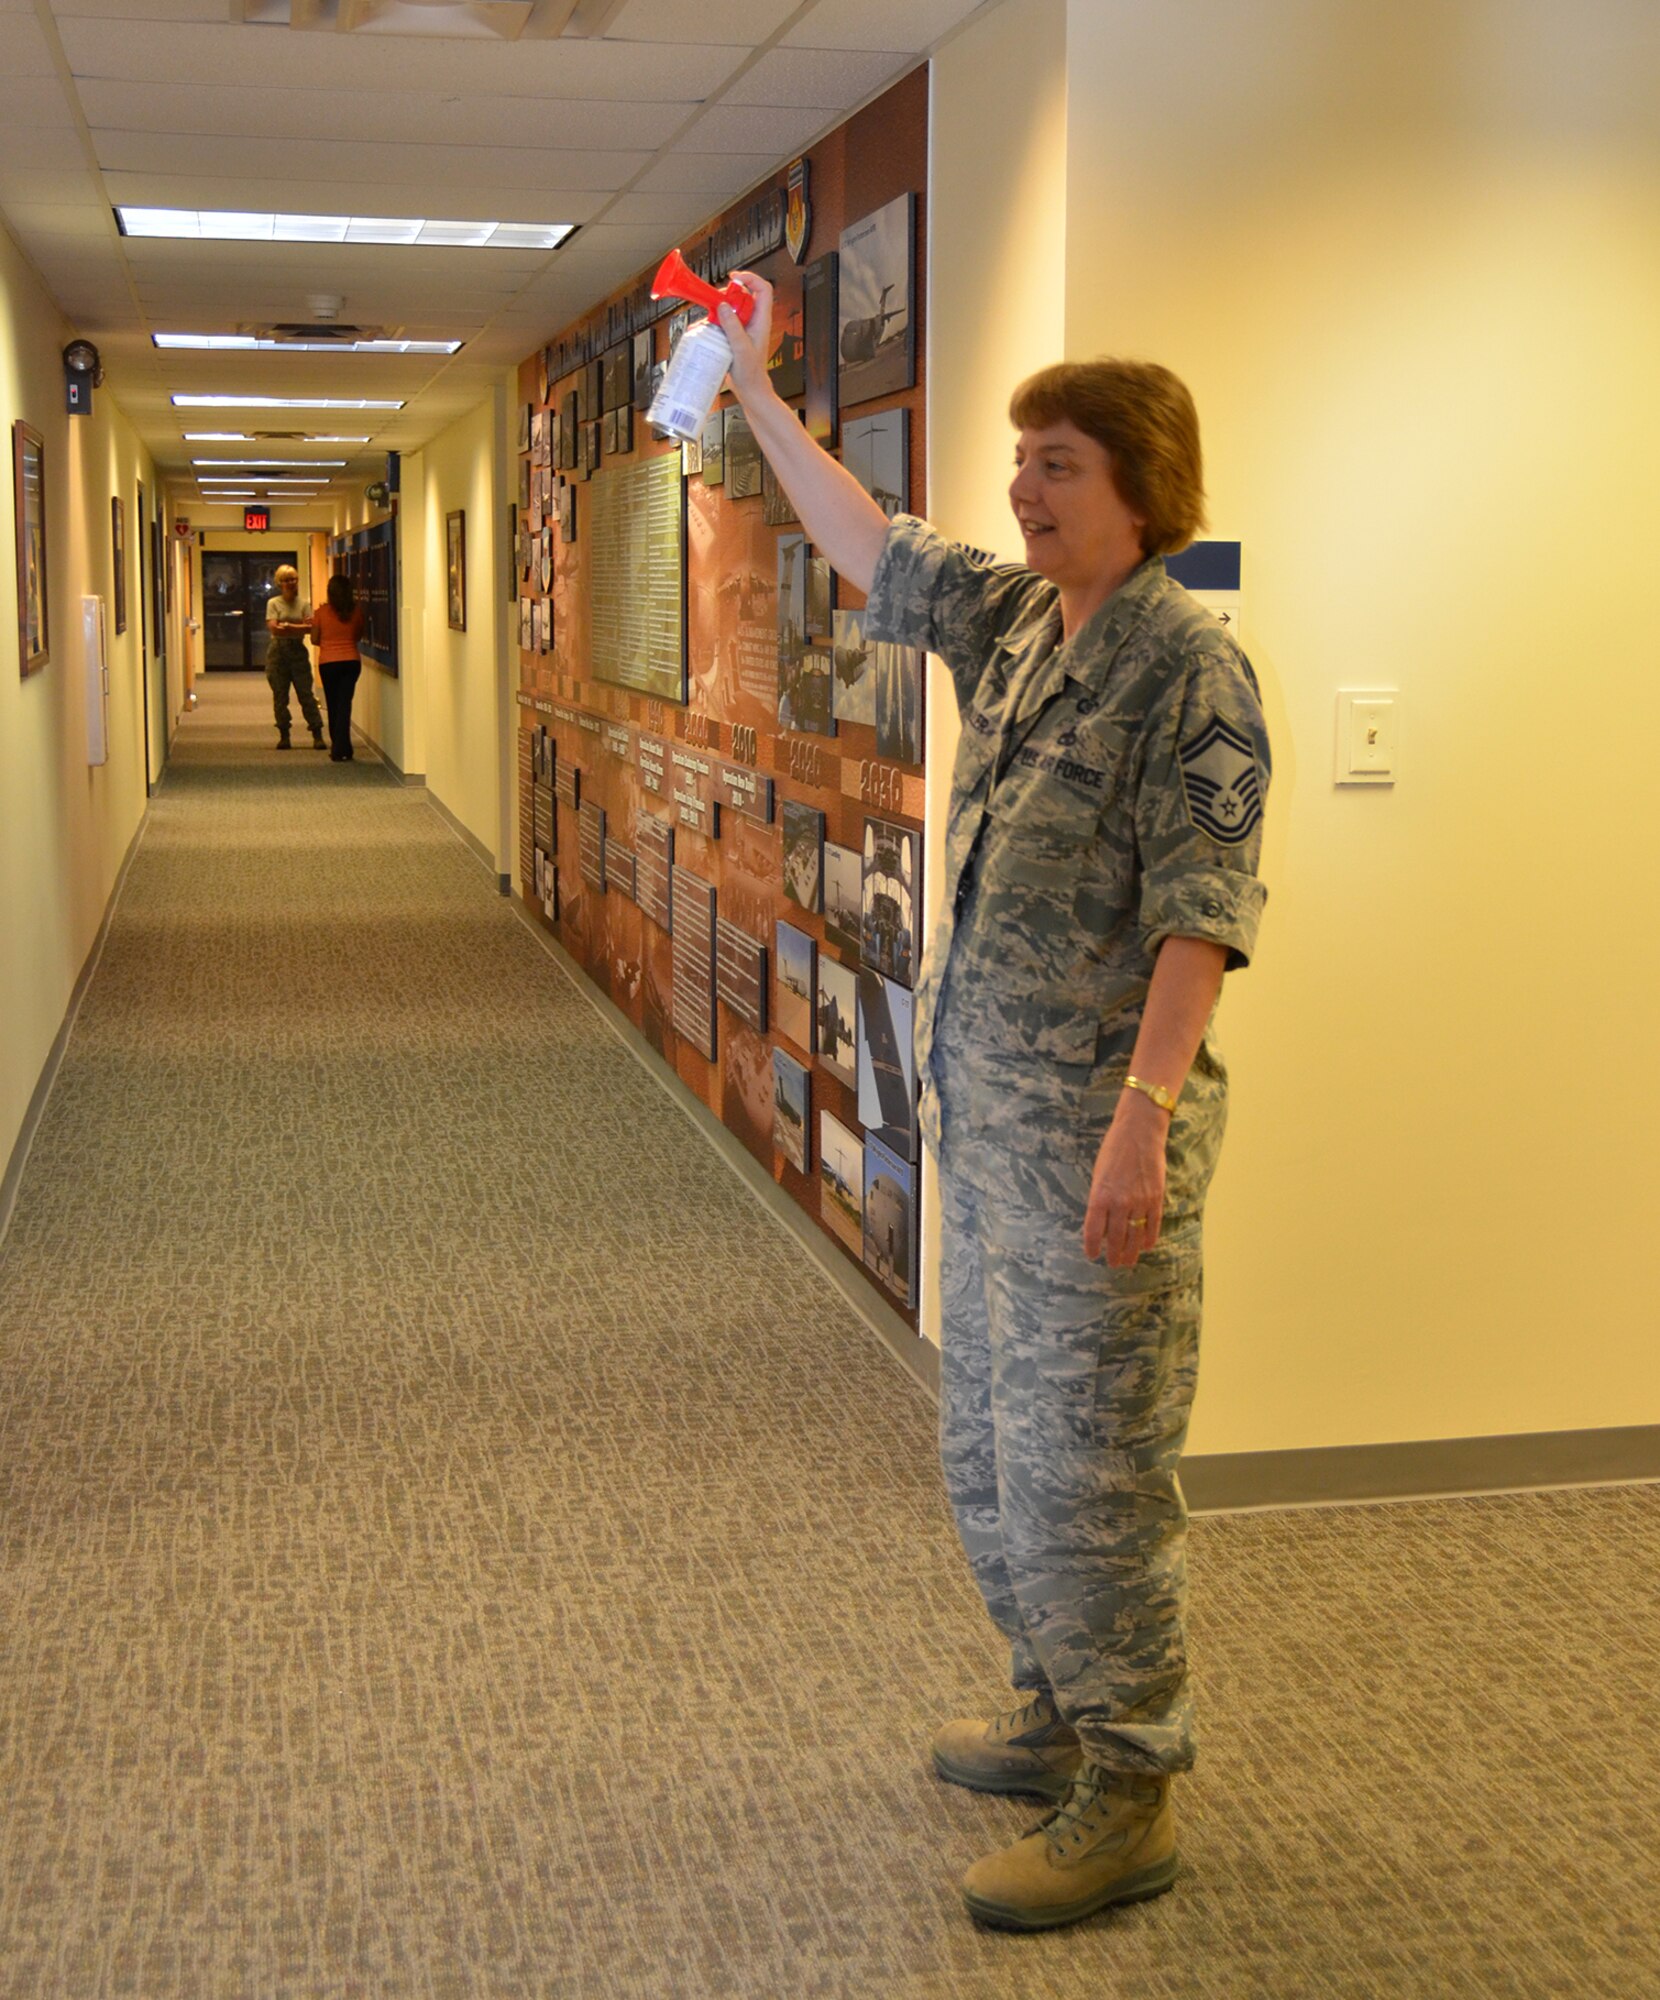 WRIGHT-PATTERSON AIR FORCE BASE, Ohio - Senior Master Sgt. Karen Miller, 445th Airlift Wing Command Post superintendent, sounds the air horn to alert wing staff members during a practice active shooter exercise in building 4010 April 6. (U.S. Air Force photo/Stacy Vaughn)